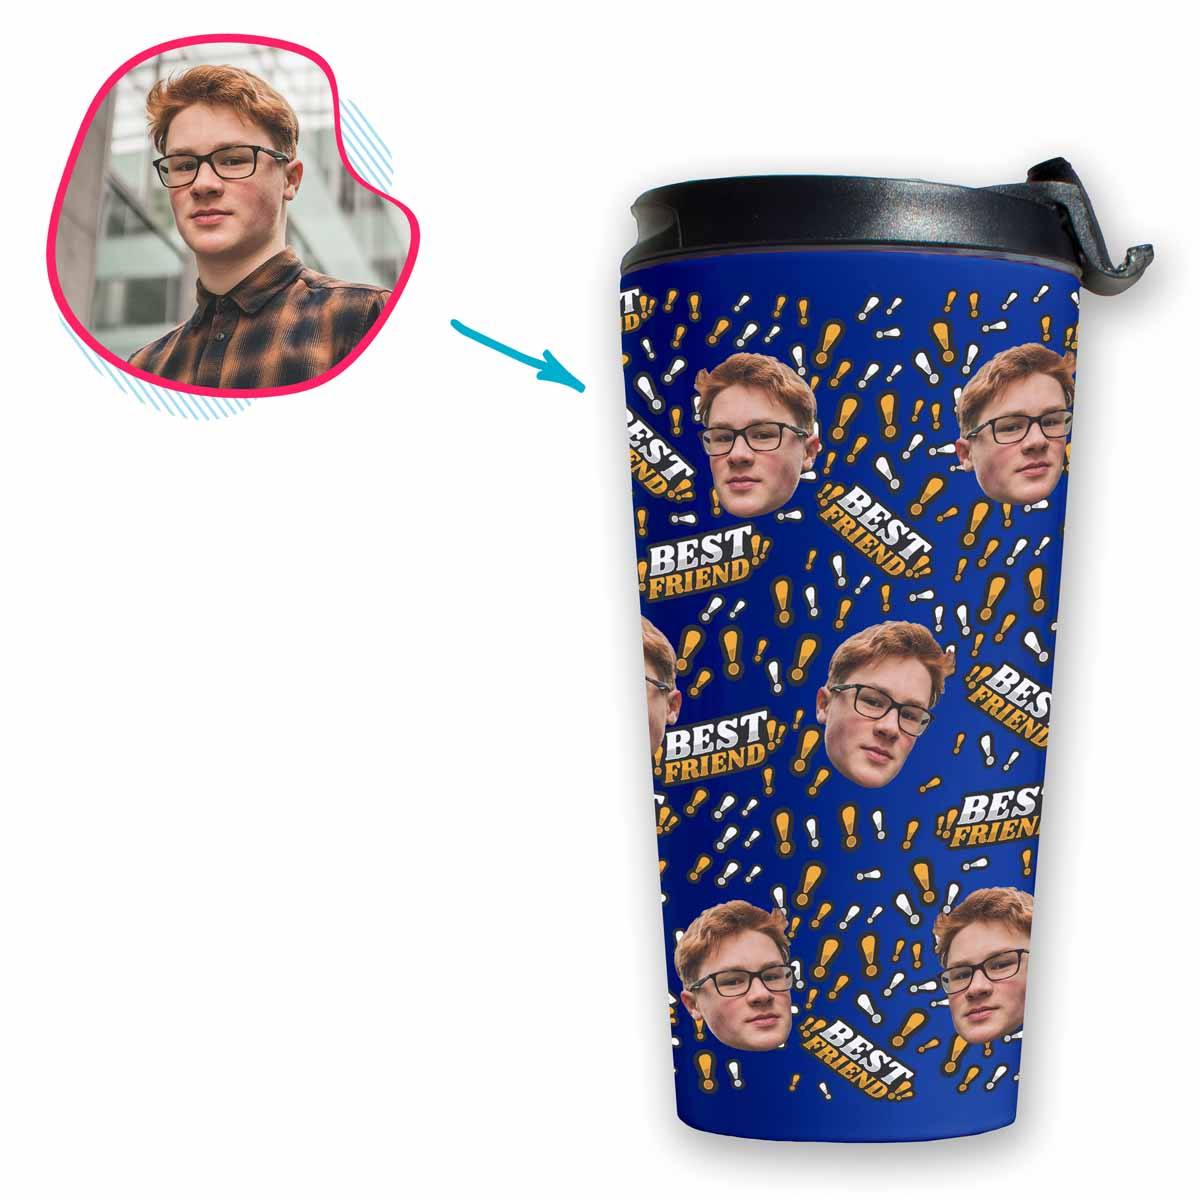 darkblue Best Friend travel mug personalized with photo of face printed on it